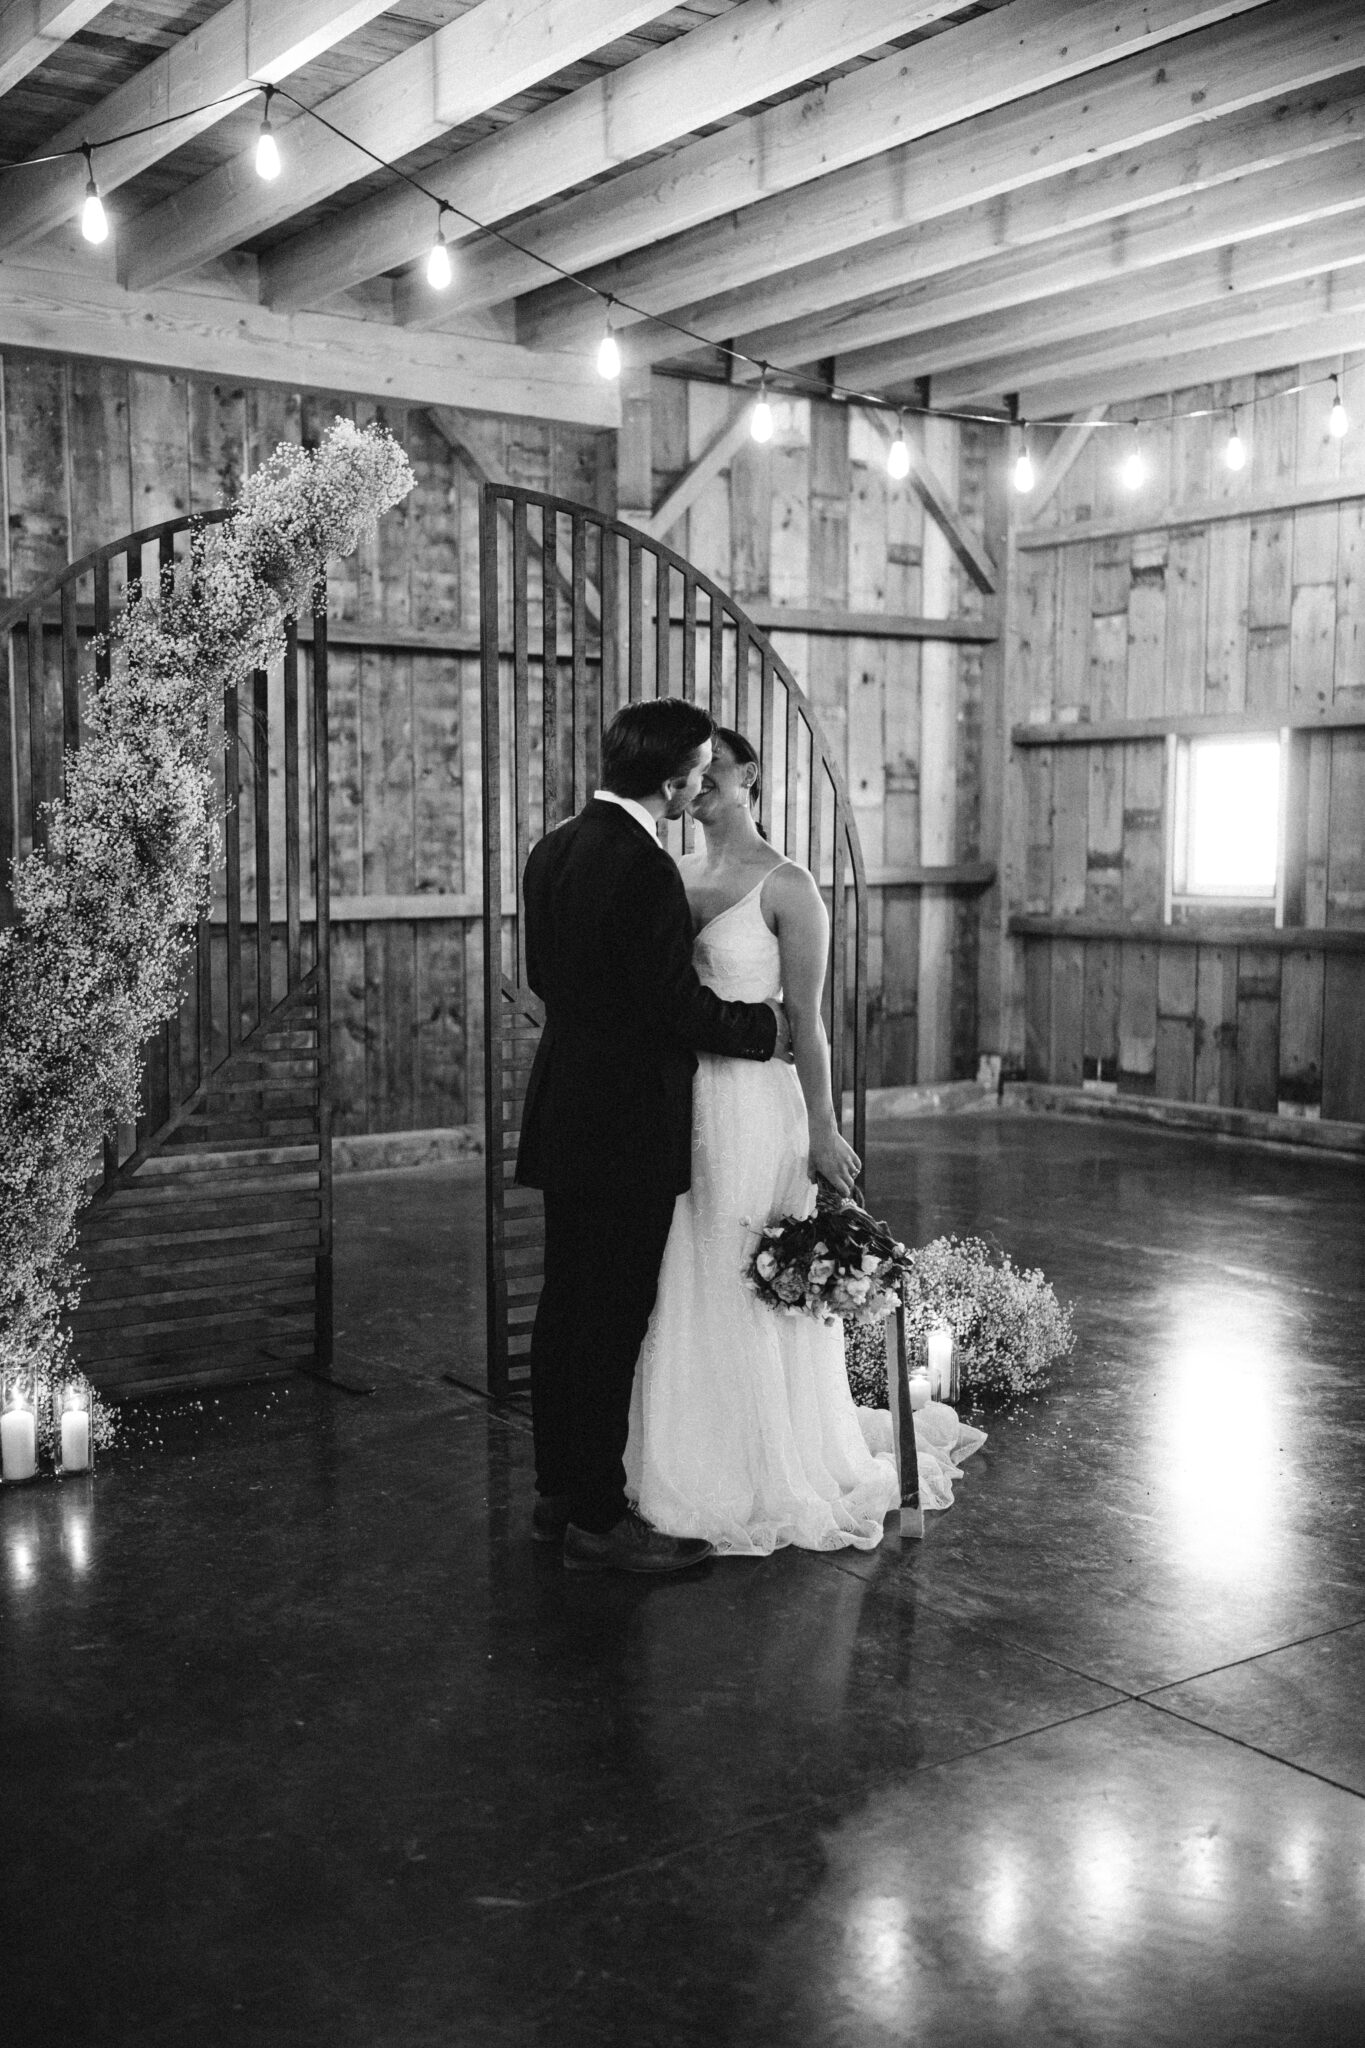 Modernized and updated take on a baby's breath installation for the ceremony arch at this Country Chic style wedding inspiration at Countryside Barn in Lethbridge Alberta, Celebratory first kiss at wedding ceremony, modern country wedding style, bride and groom kiss front of the ceremony arch